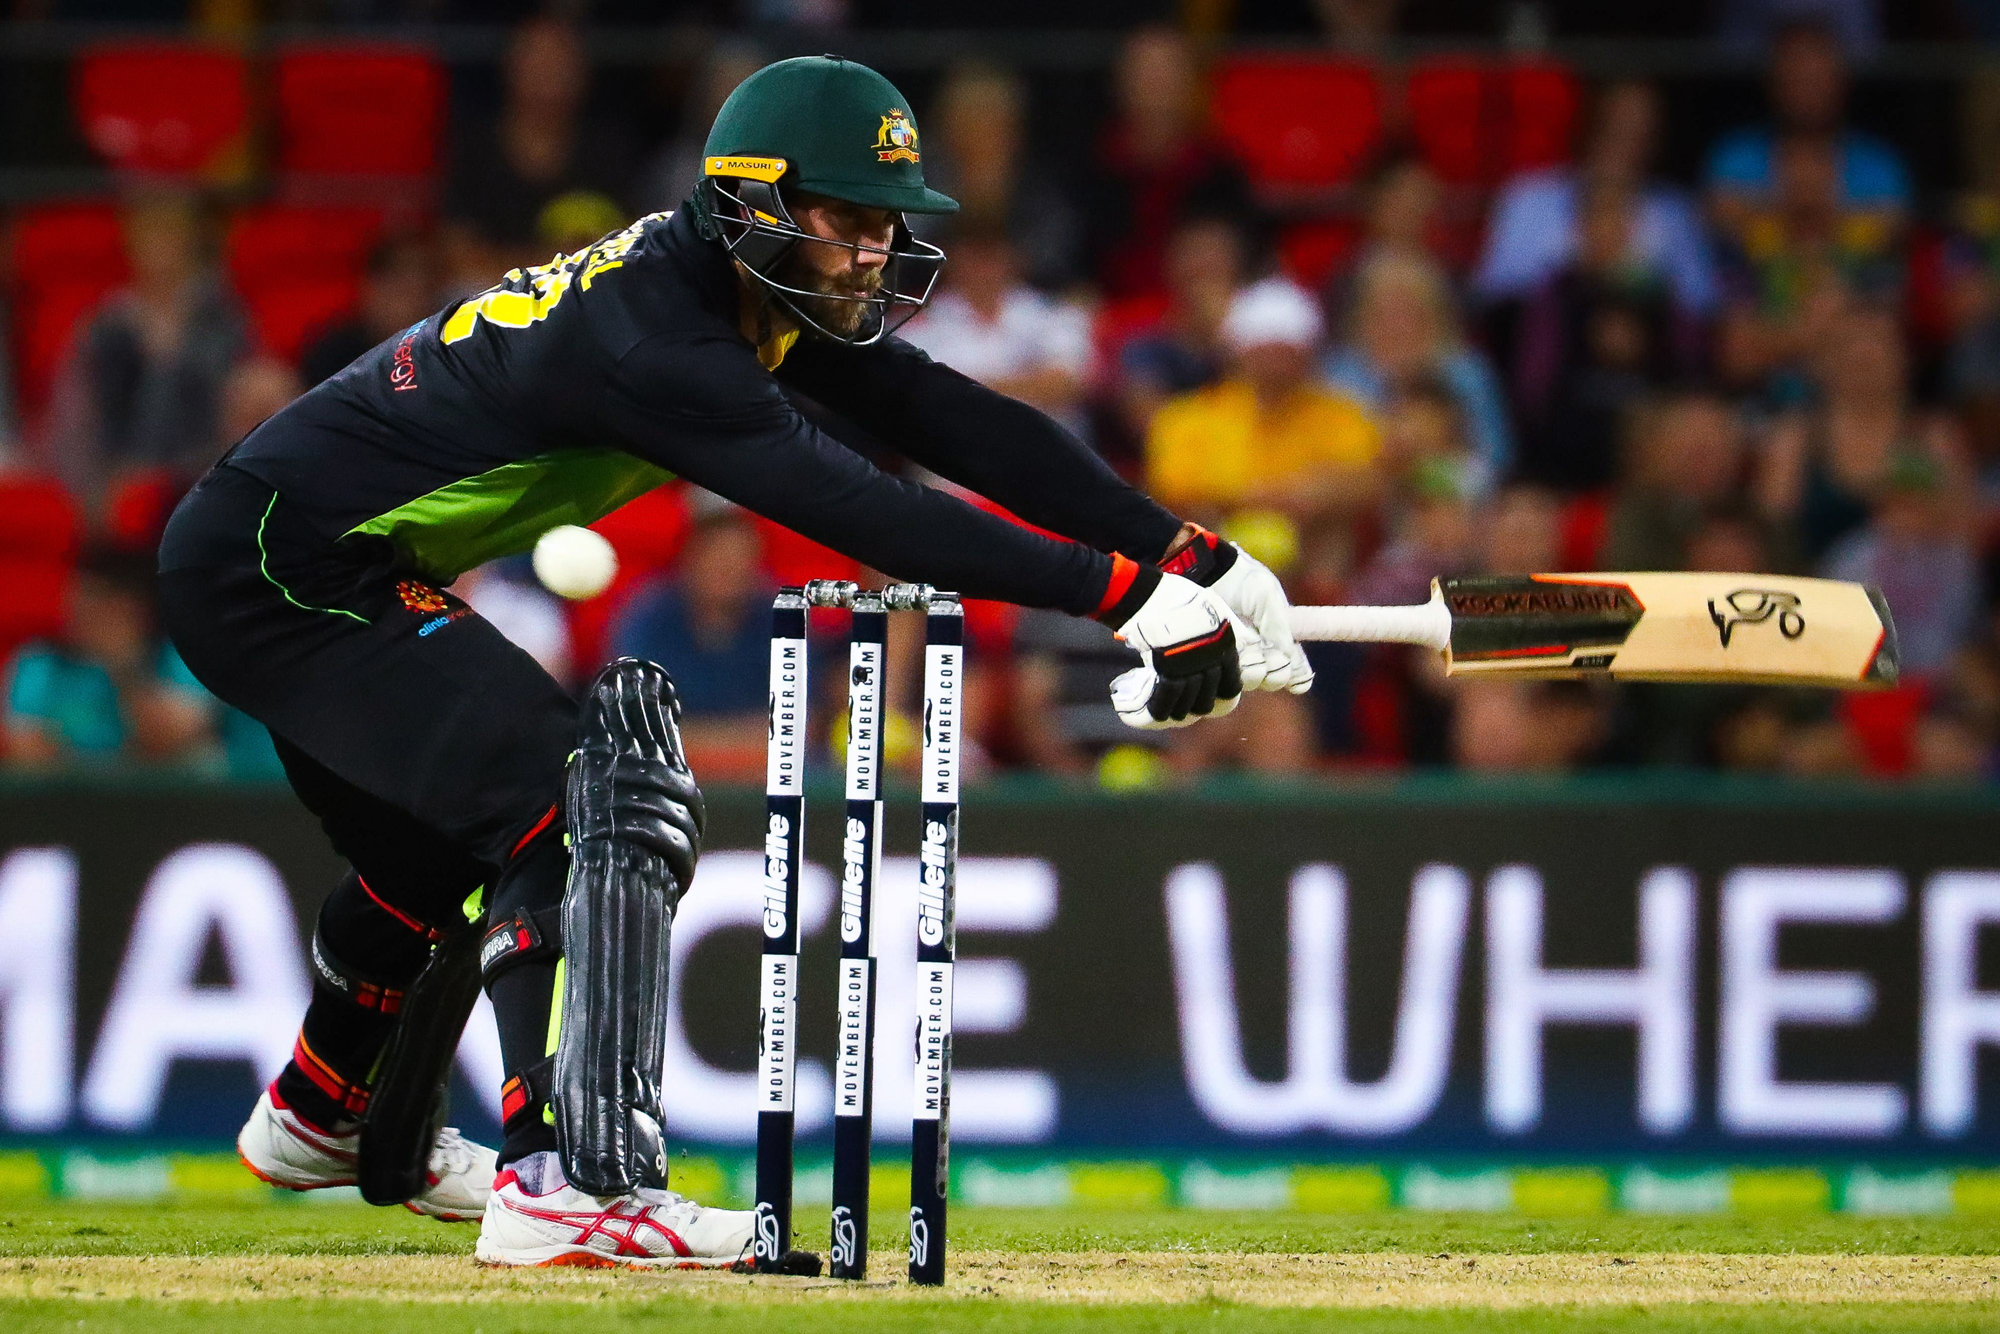 Glenn Maxwell of Australia plays a shot during the T20 international cricket match between Australia and South Africa at Metricon Stadium on the Gold Coast on November 17, 2018. (Photo by Patrick HAMILTON / AFP) / -- IMAGE RESTRICTED TO EDITORIAL USE - ST